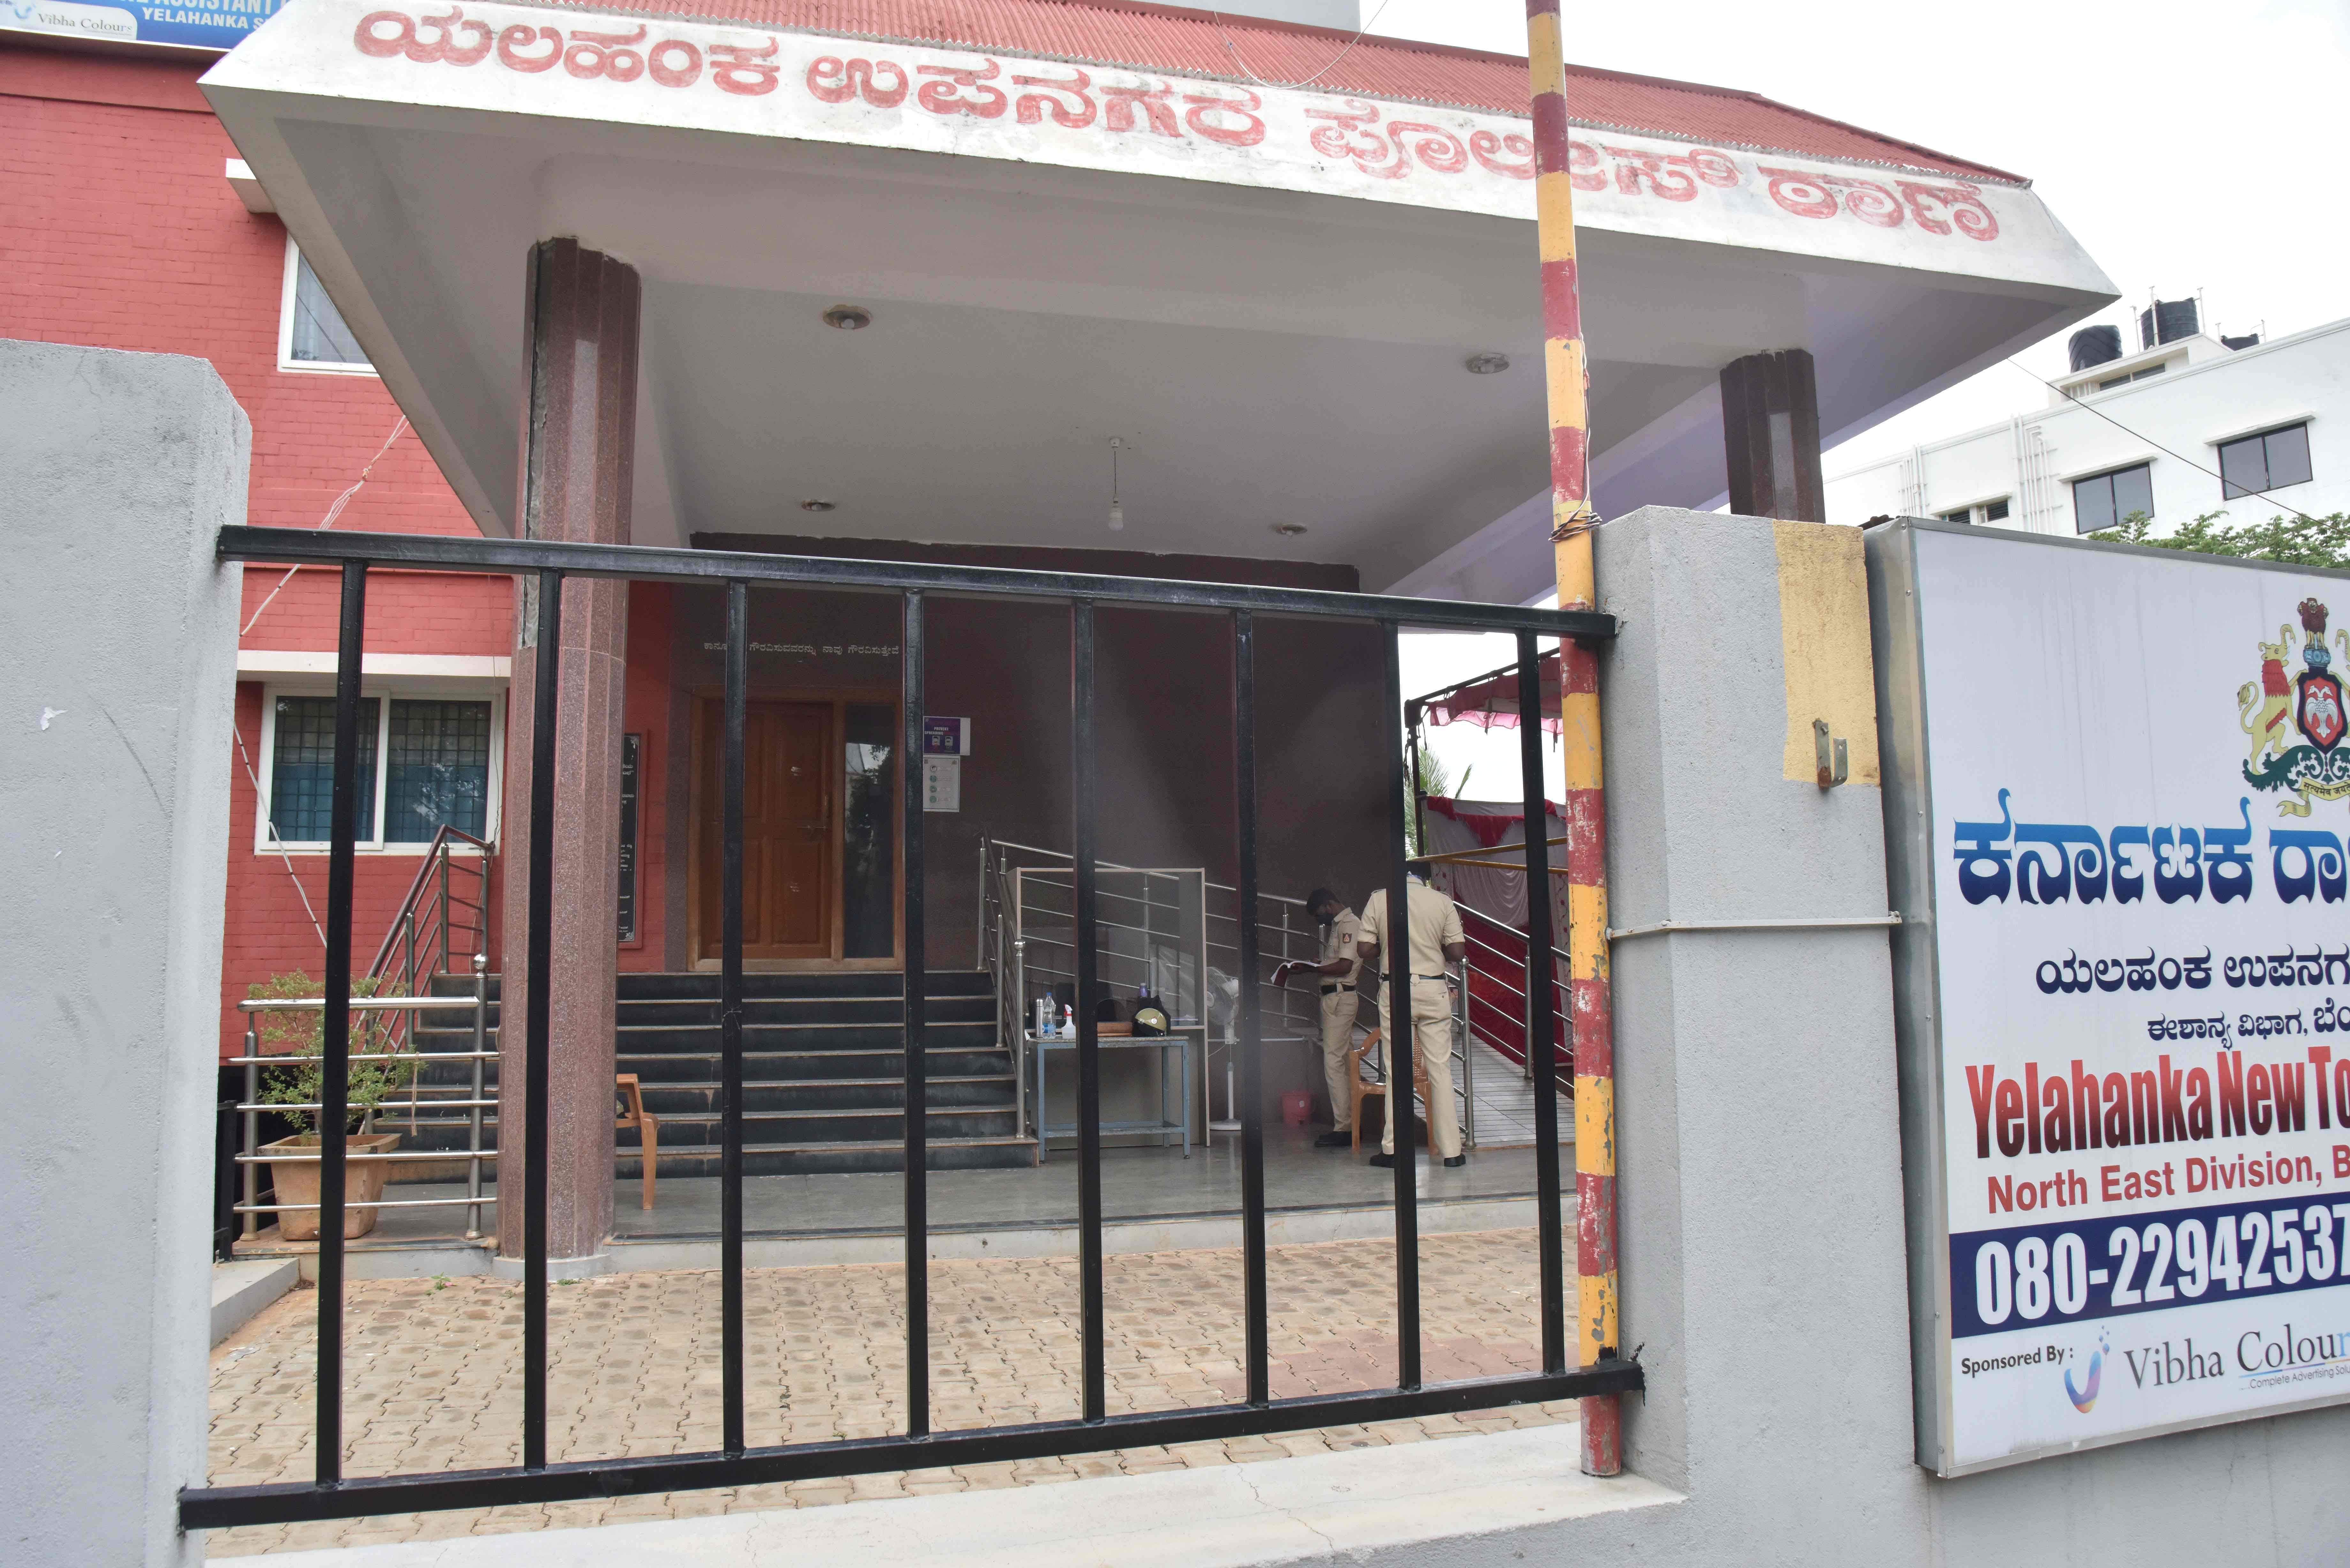 The police station at Yelahanka New Town, sealdown after positive case of Covid 19, in Bengaluru. Credit: DH Photo